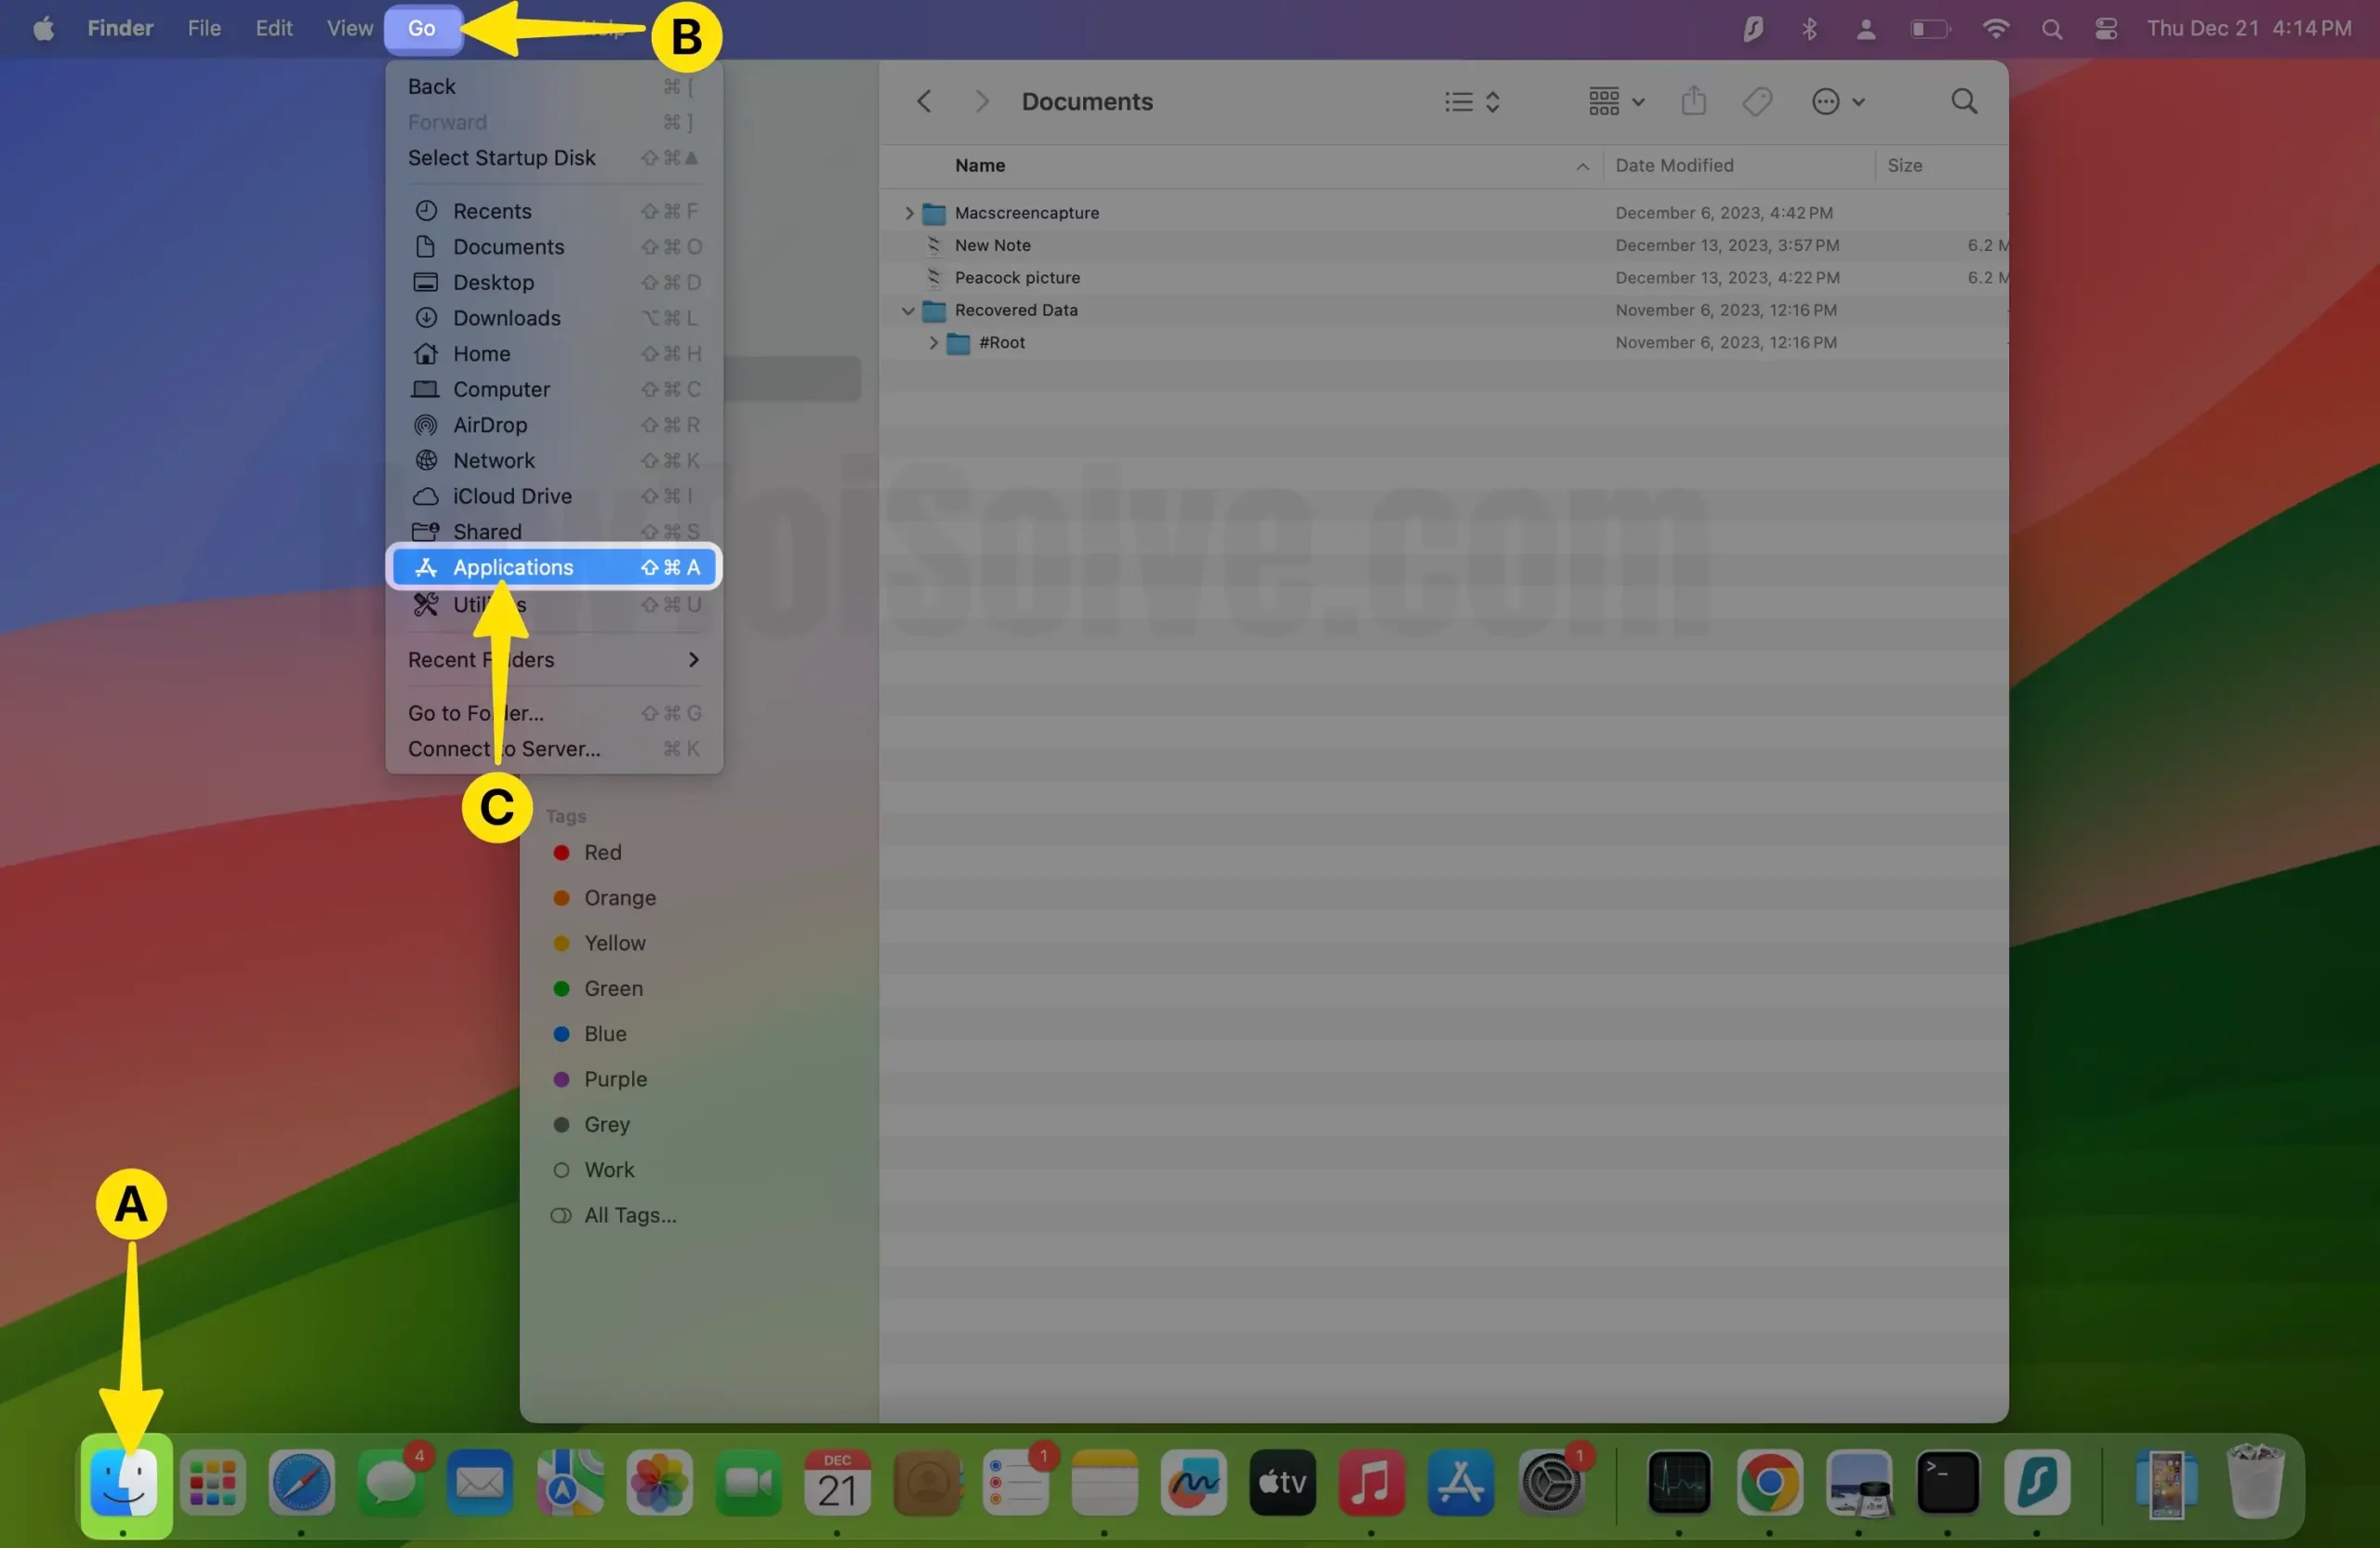 Open Finder Select Go From Mac Menu Tap on Application on Mac